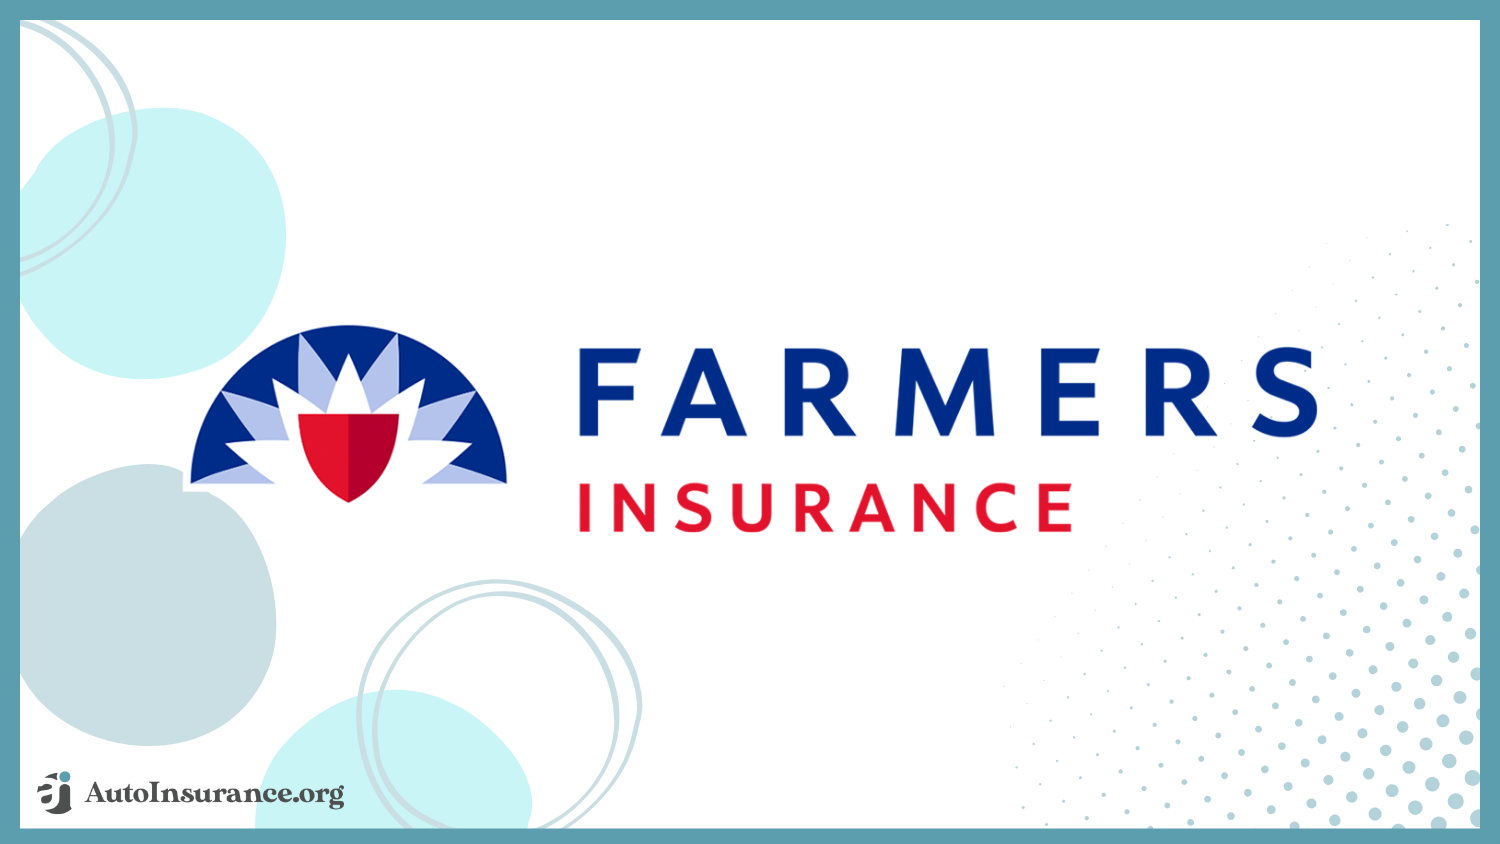 Farmers: Best Auto Insurance Companies for High-Risk Drivers